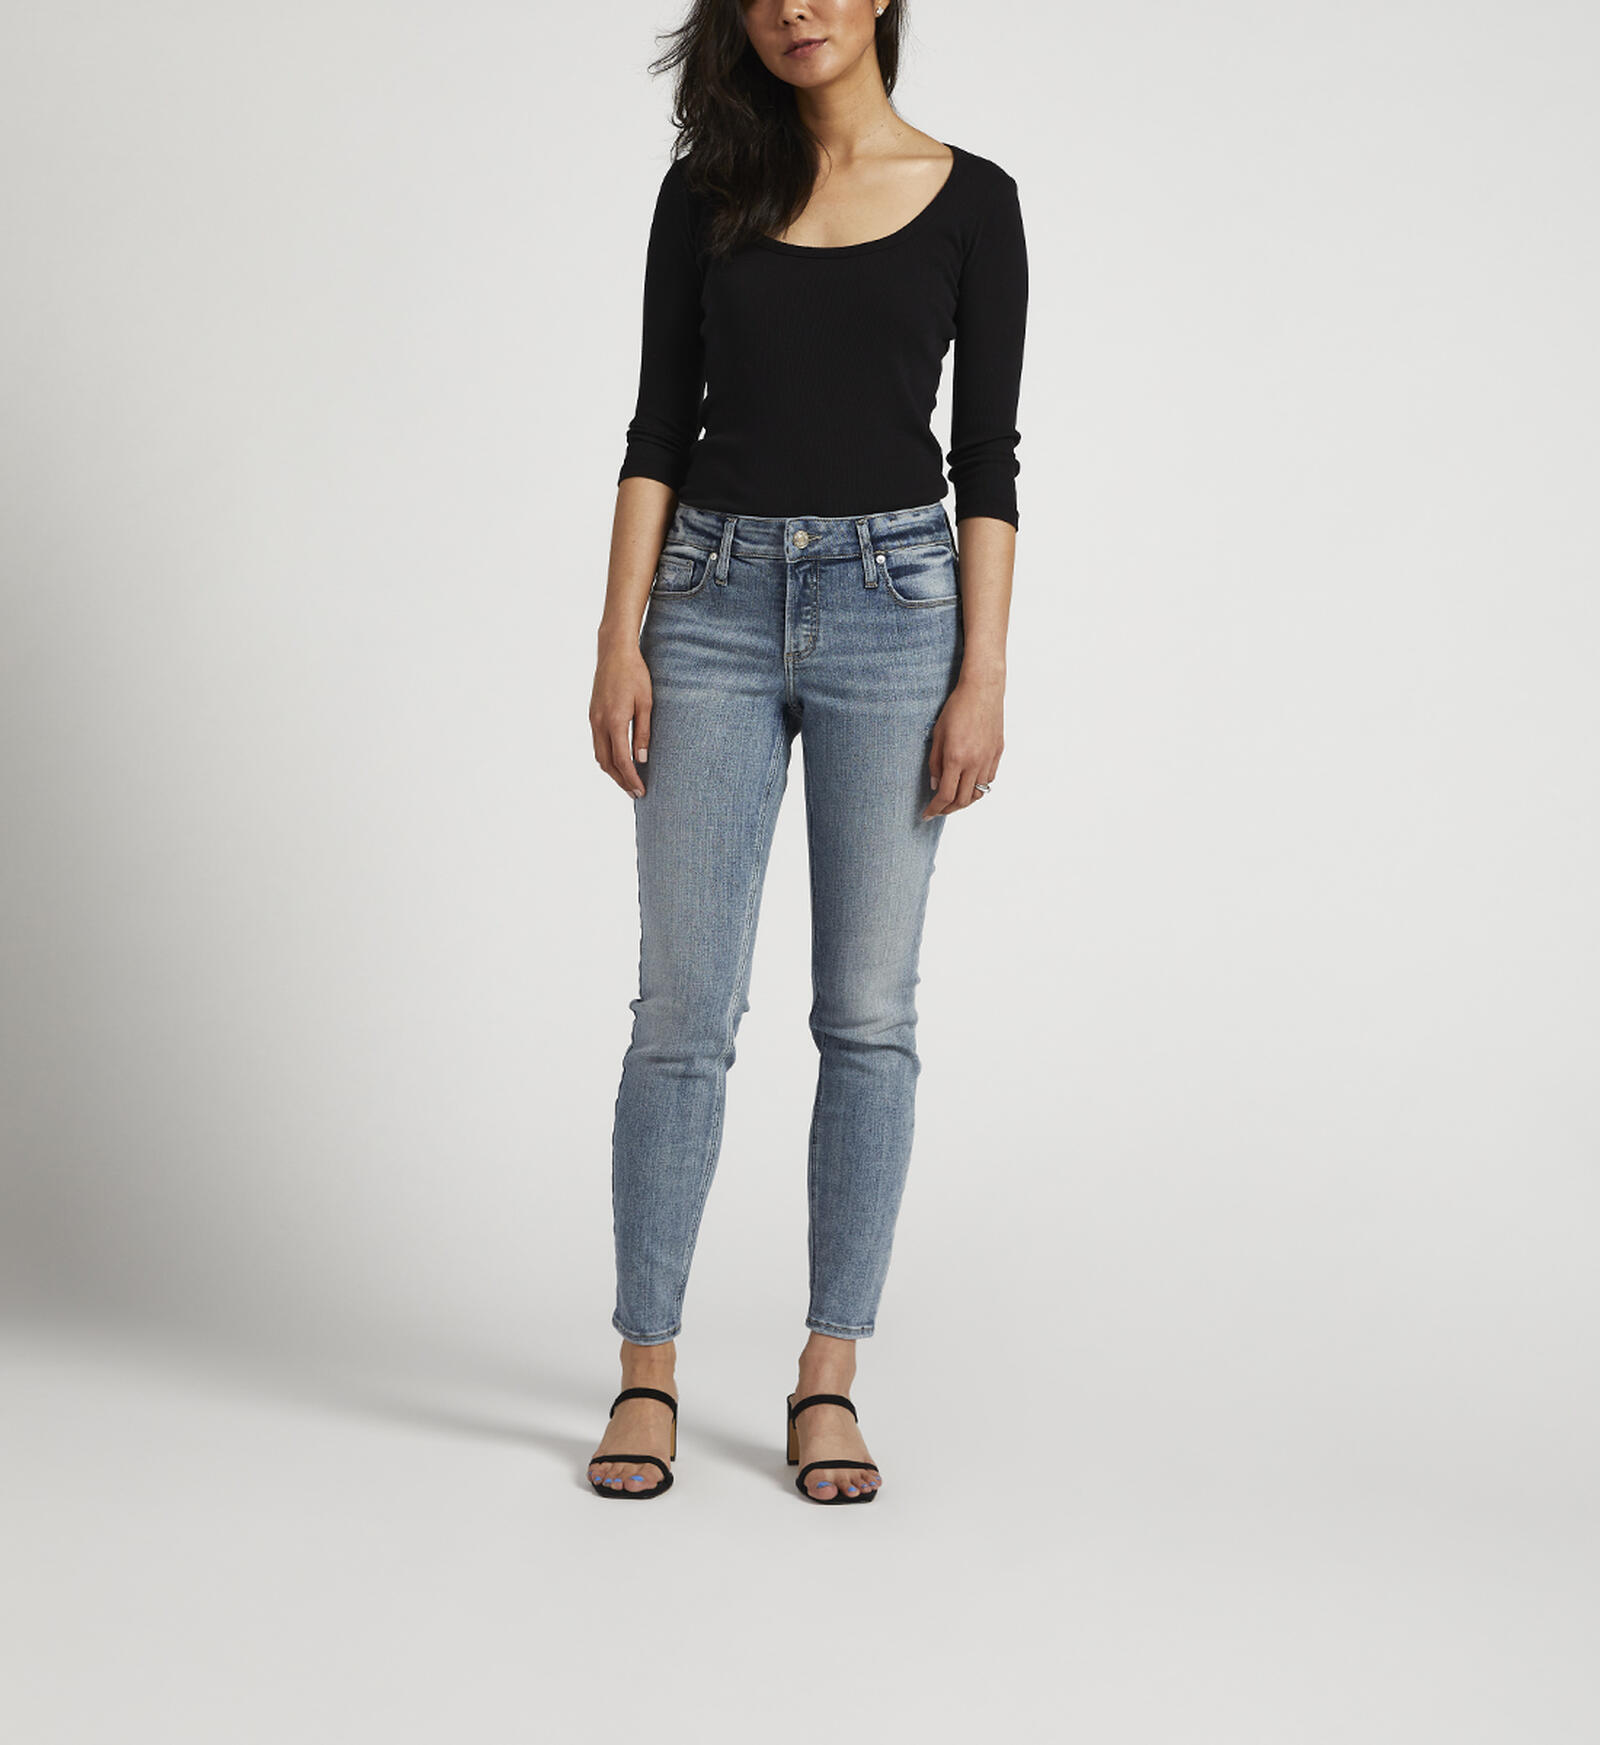 Buy Elyse Mid Rise Skinny Jeans for USD 78.00